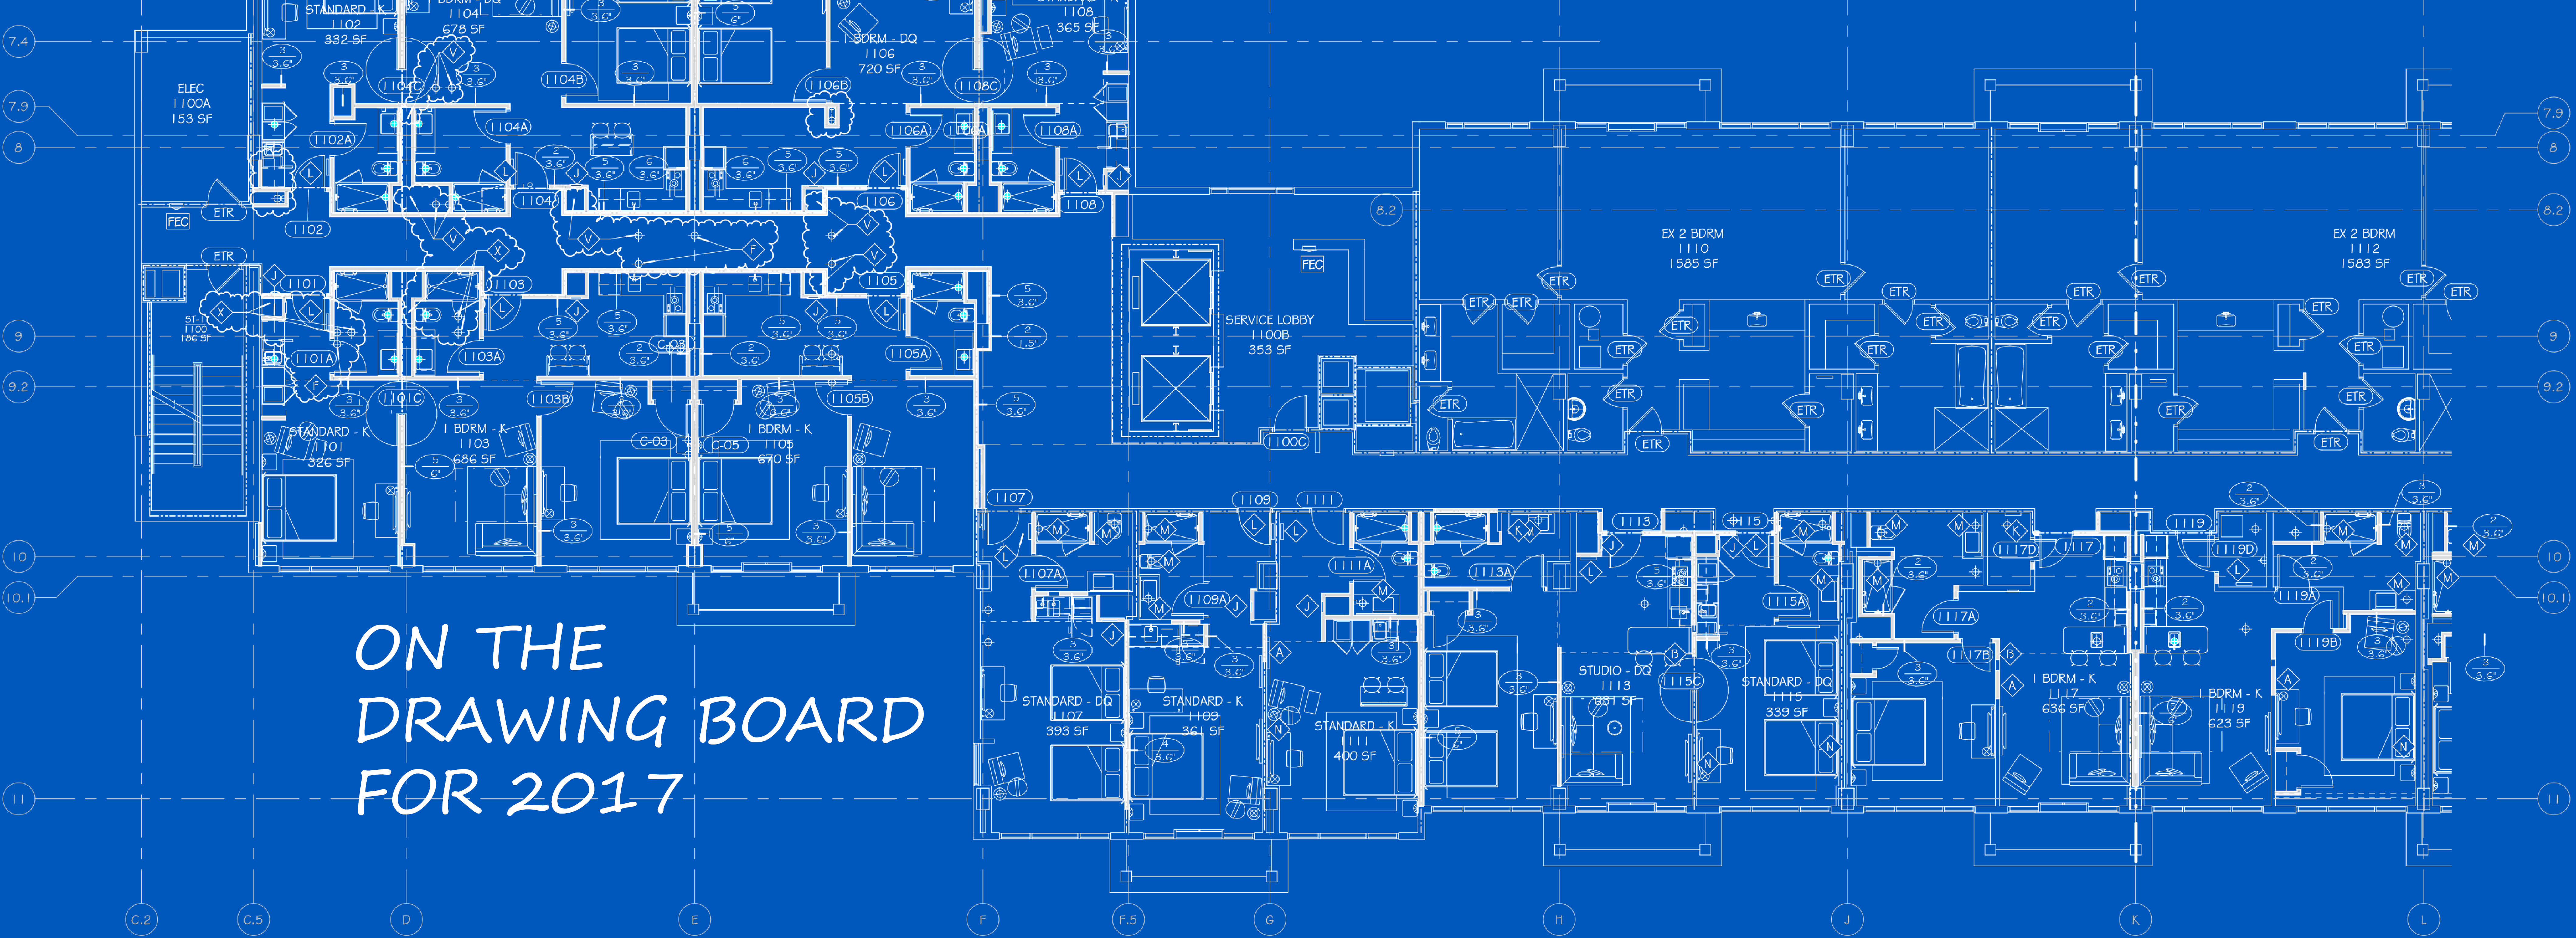 Blueprint On the Drawing Board Feature Image 2